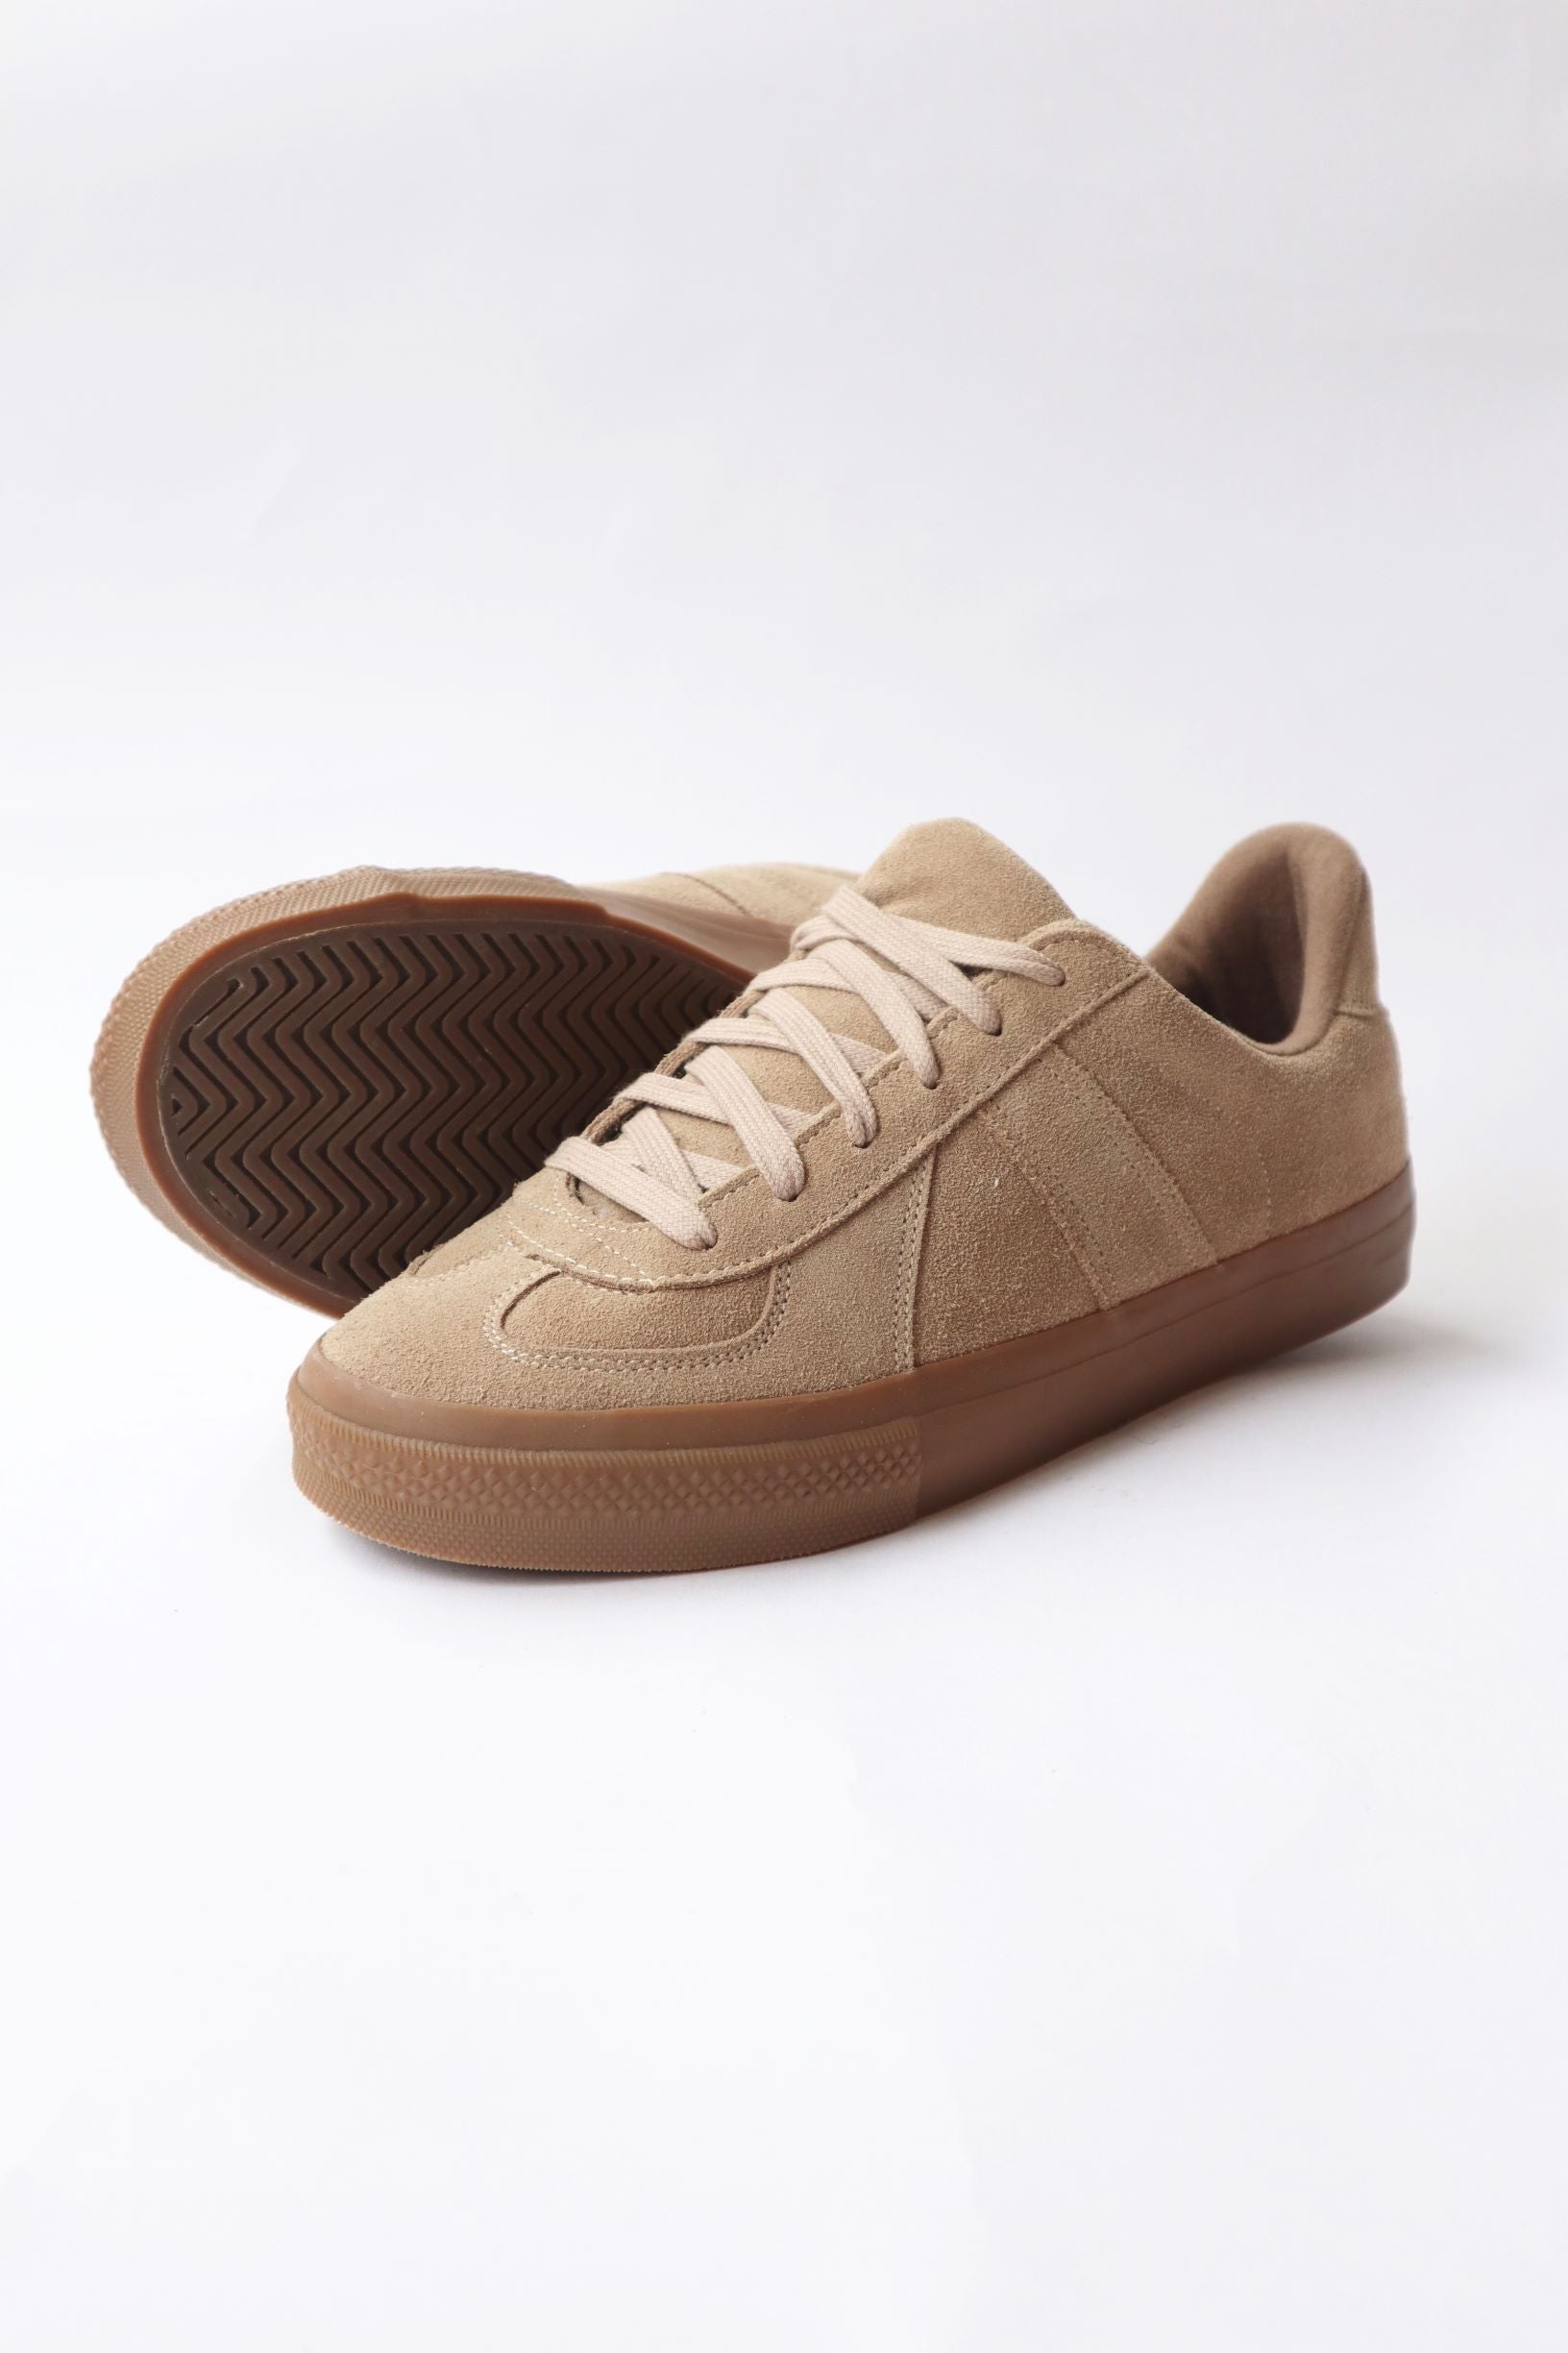 REPRODUCTION OF FOUND | 4700S GERMAN MILITARY TRAINER Beige Suede